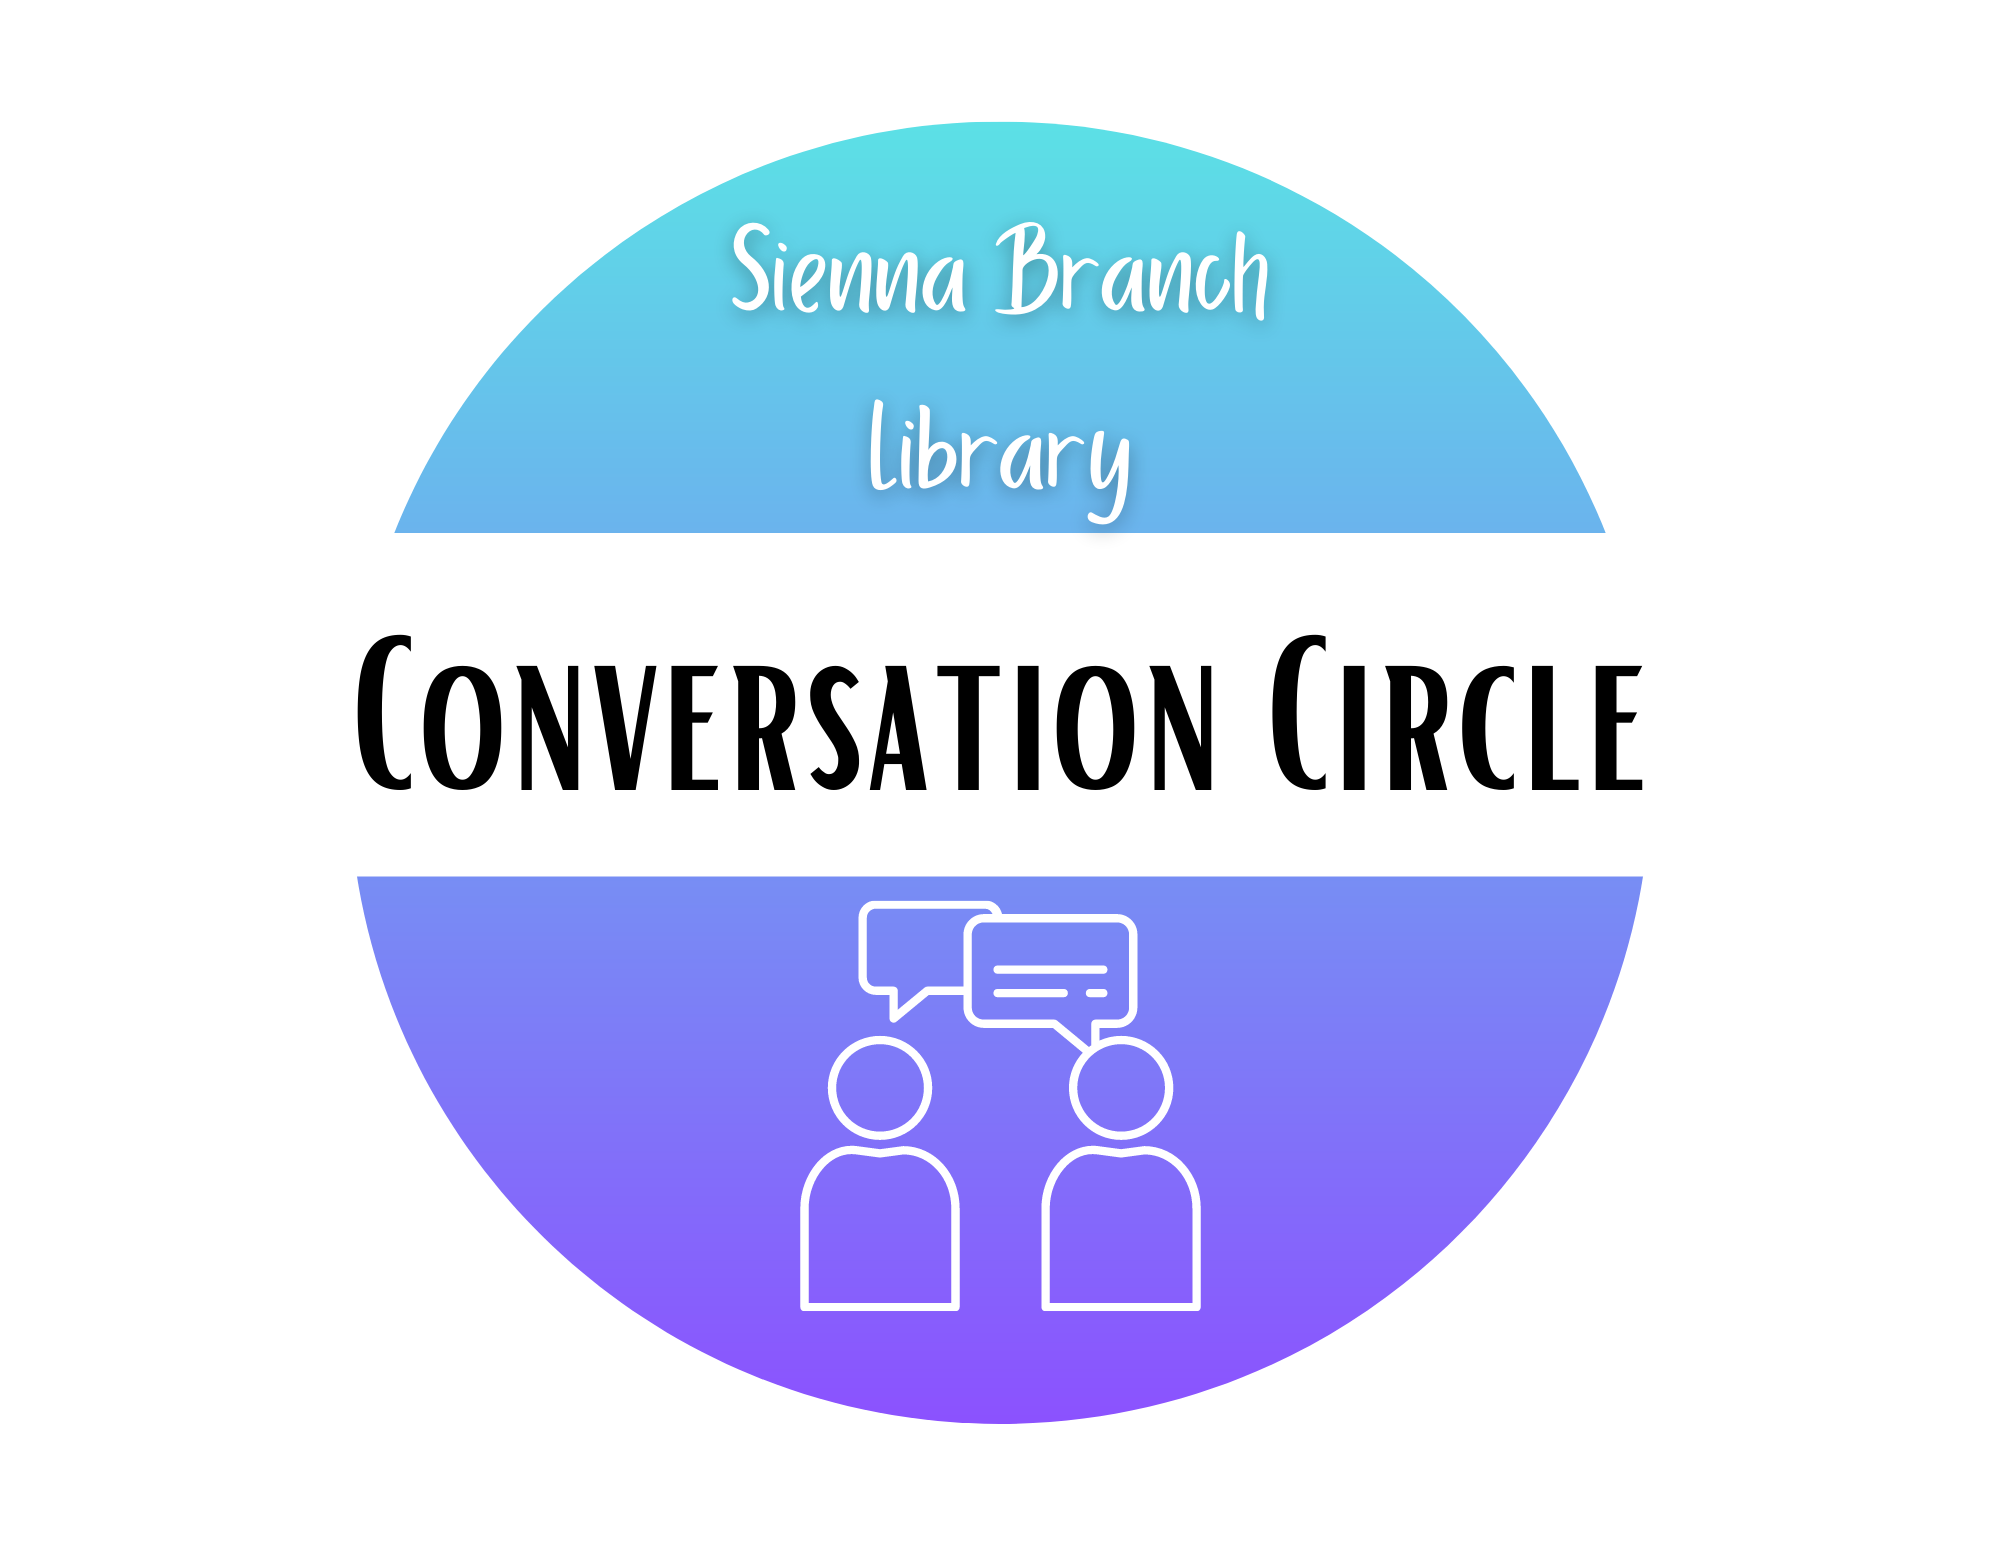 Gradient circle with the text "Sienna Branch Library" and "Conversation Circle"